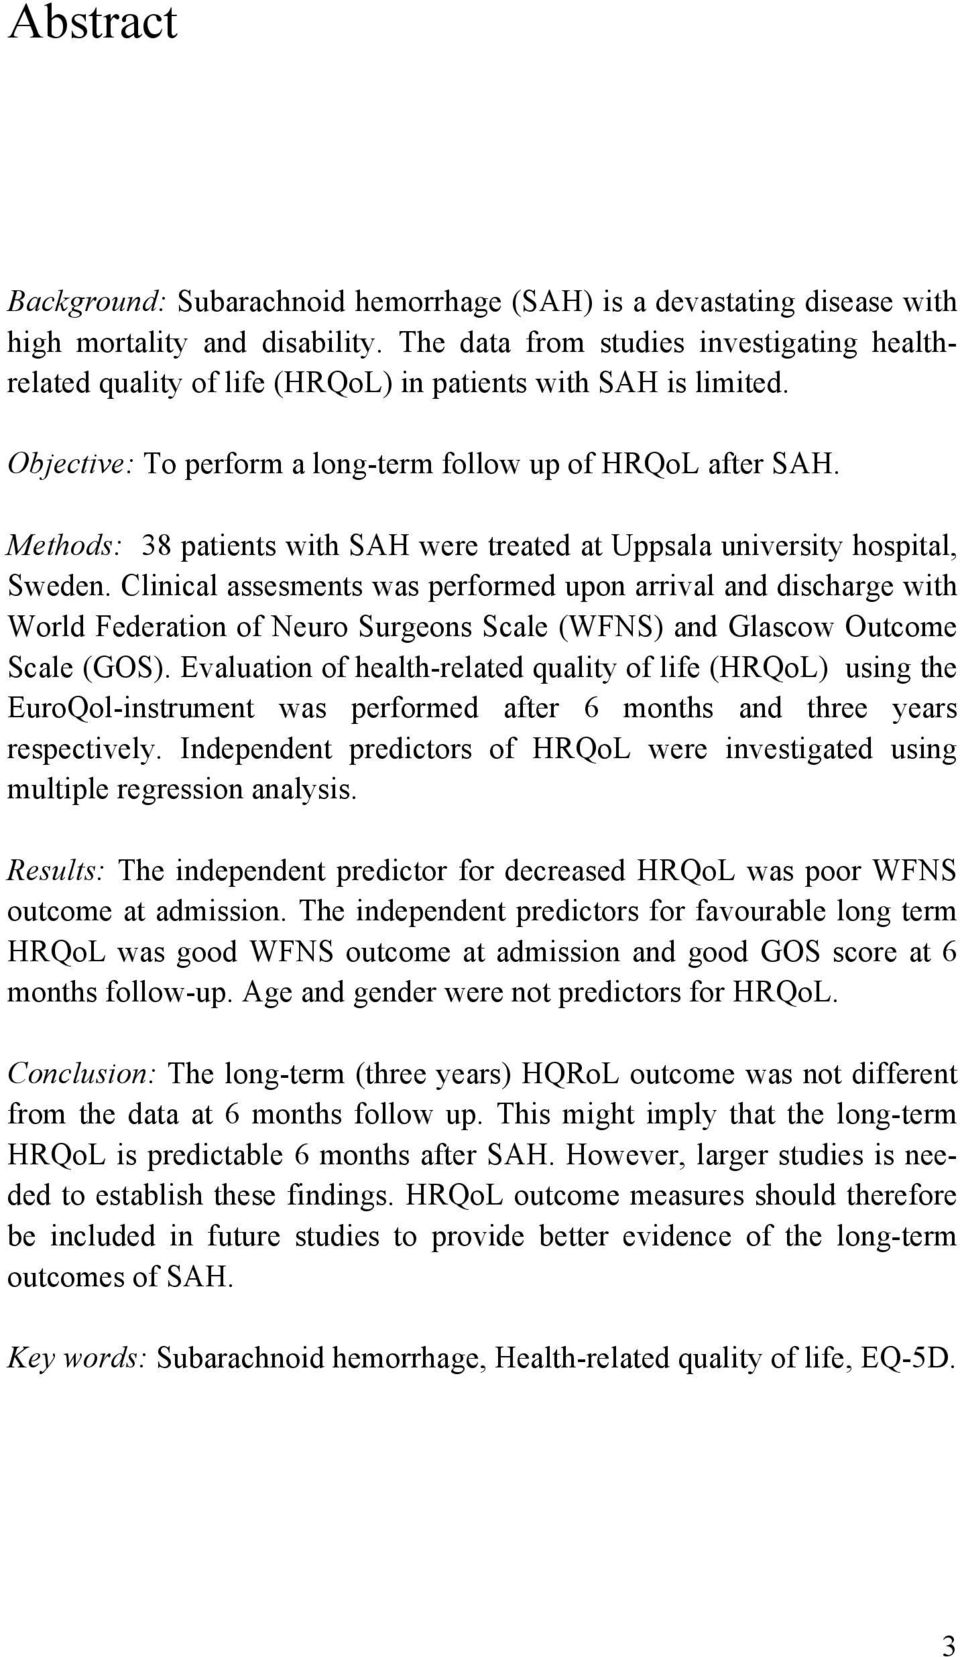 Methods: 38 patients with SAH were treated at Uppsala university hospital, Sweden.